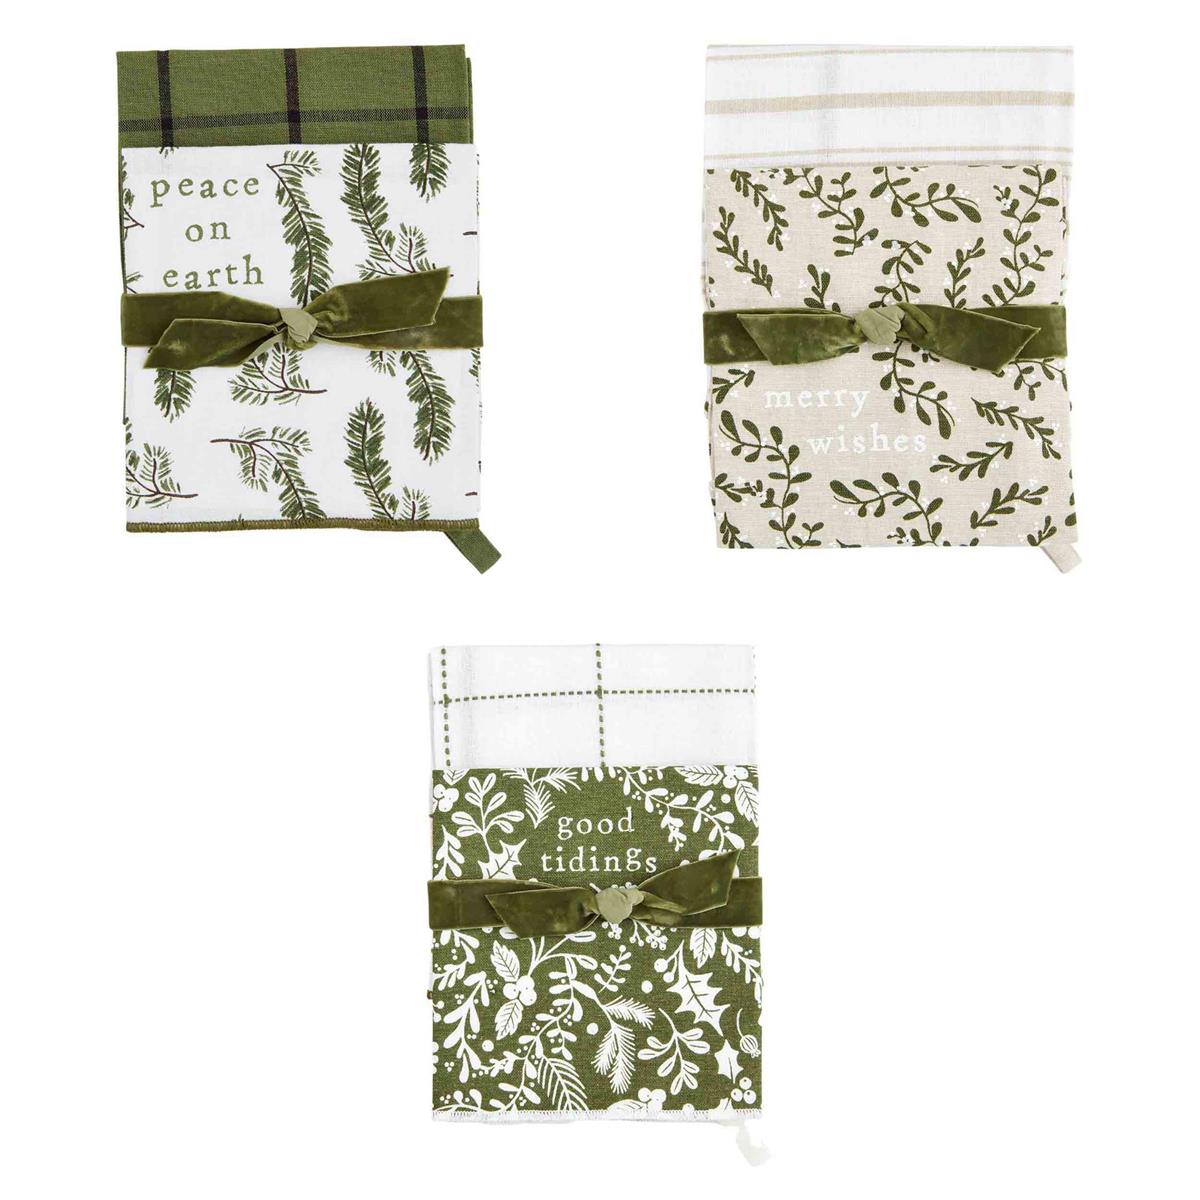 all three styles of white and green christmas towel sets displayed against a white background